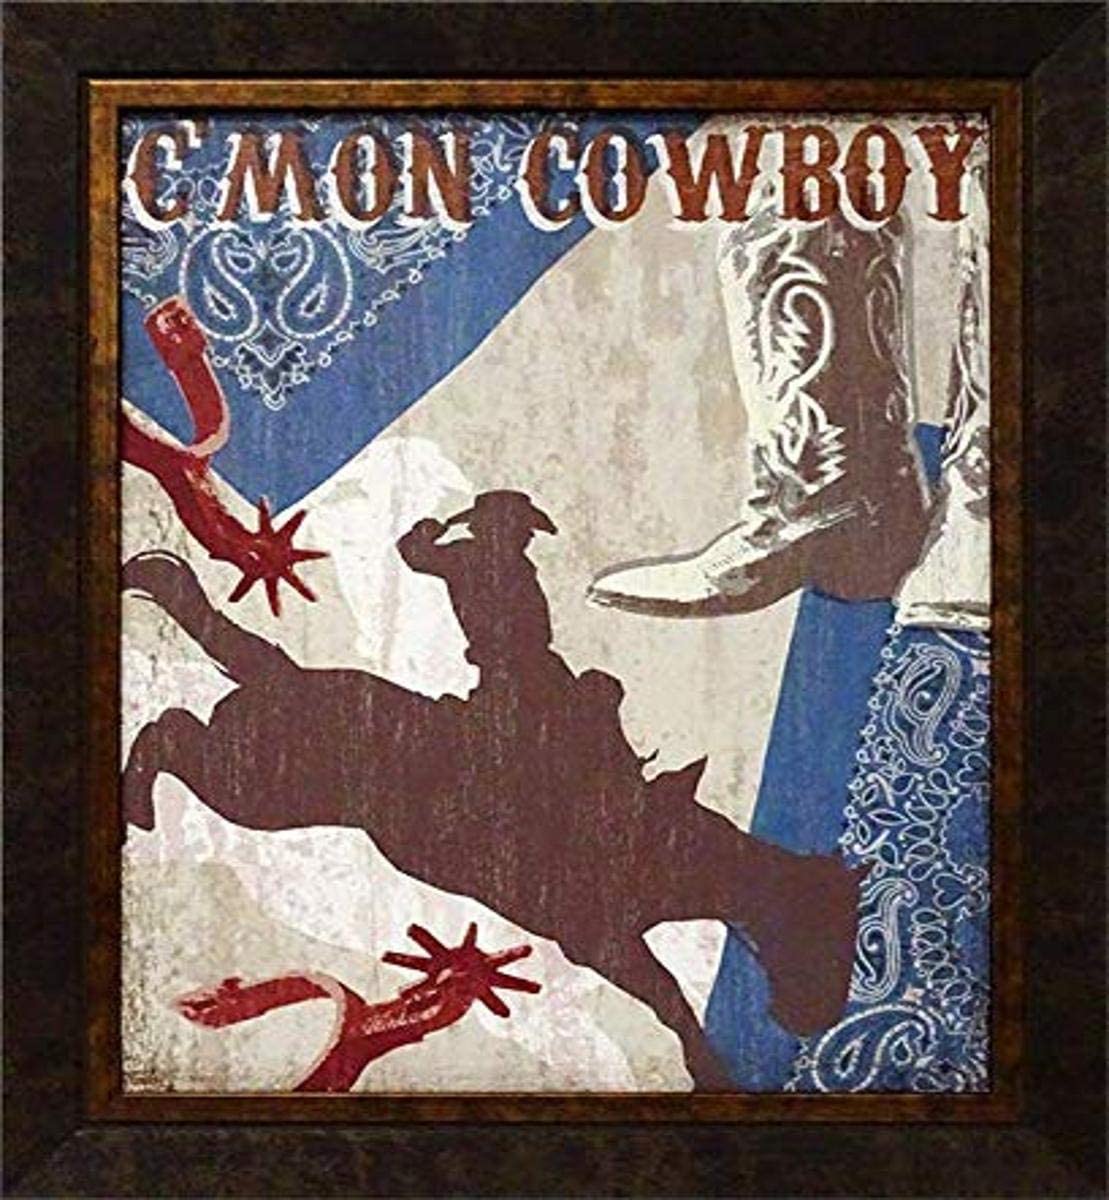 Picture of Artistic Reflections AR811 22 x 18 in. Framed Art Print - Cmon Cowboy